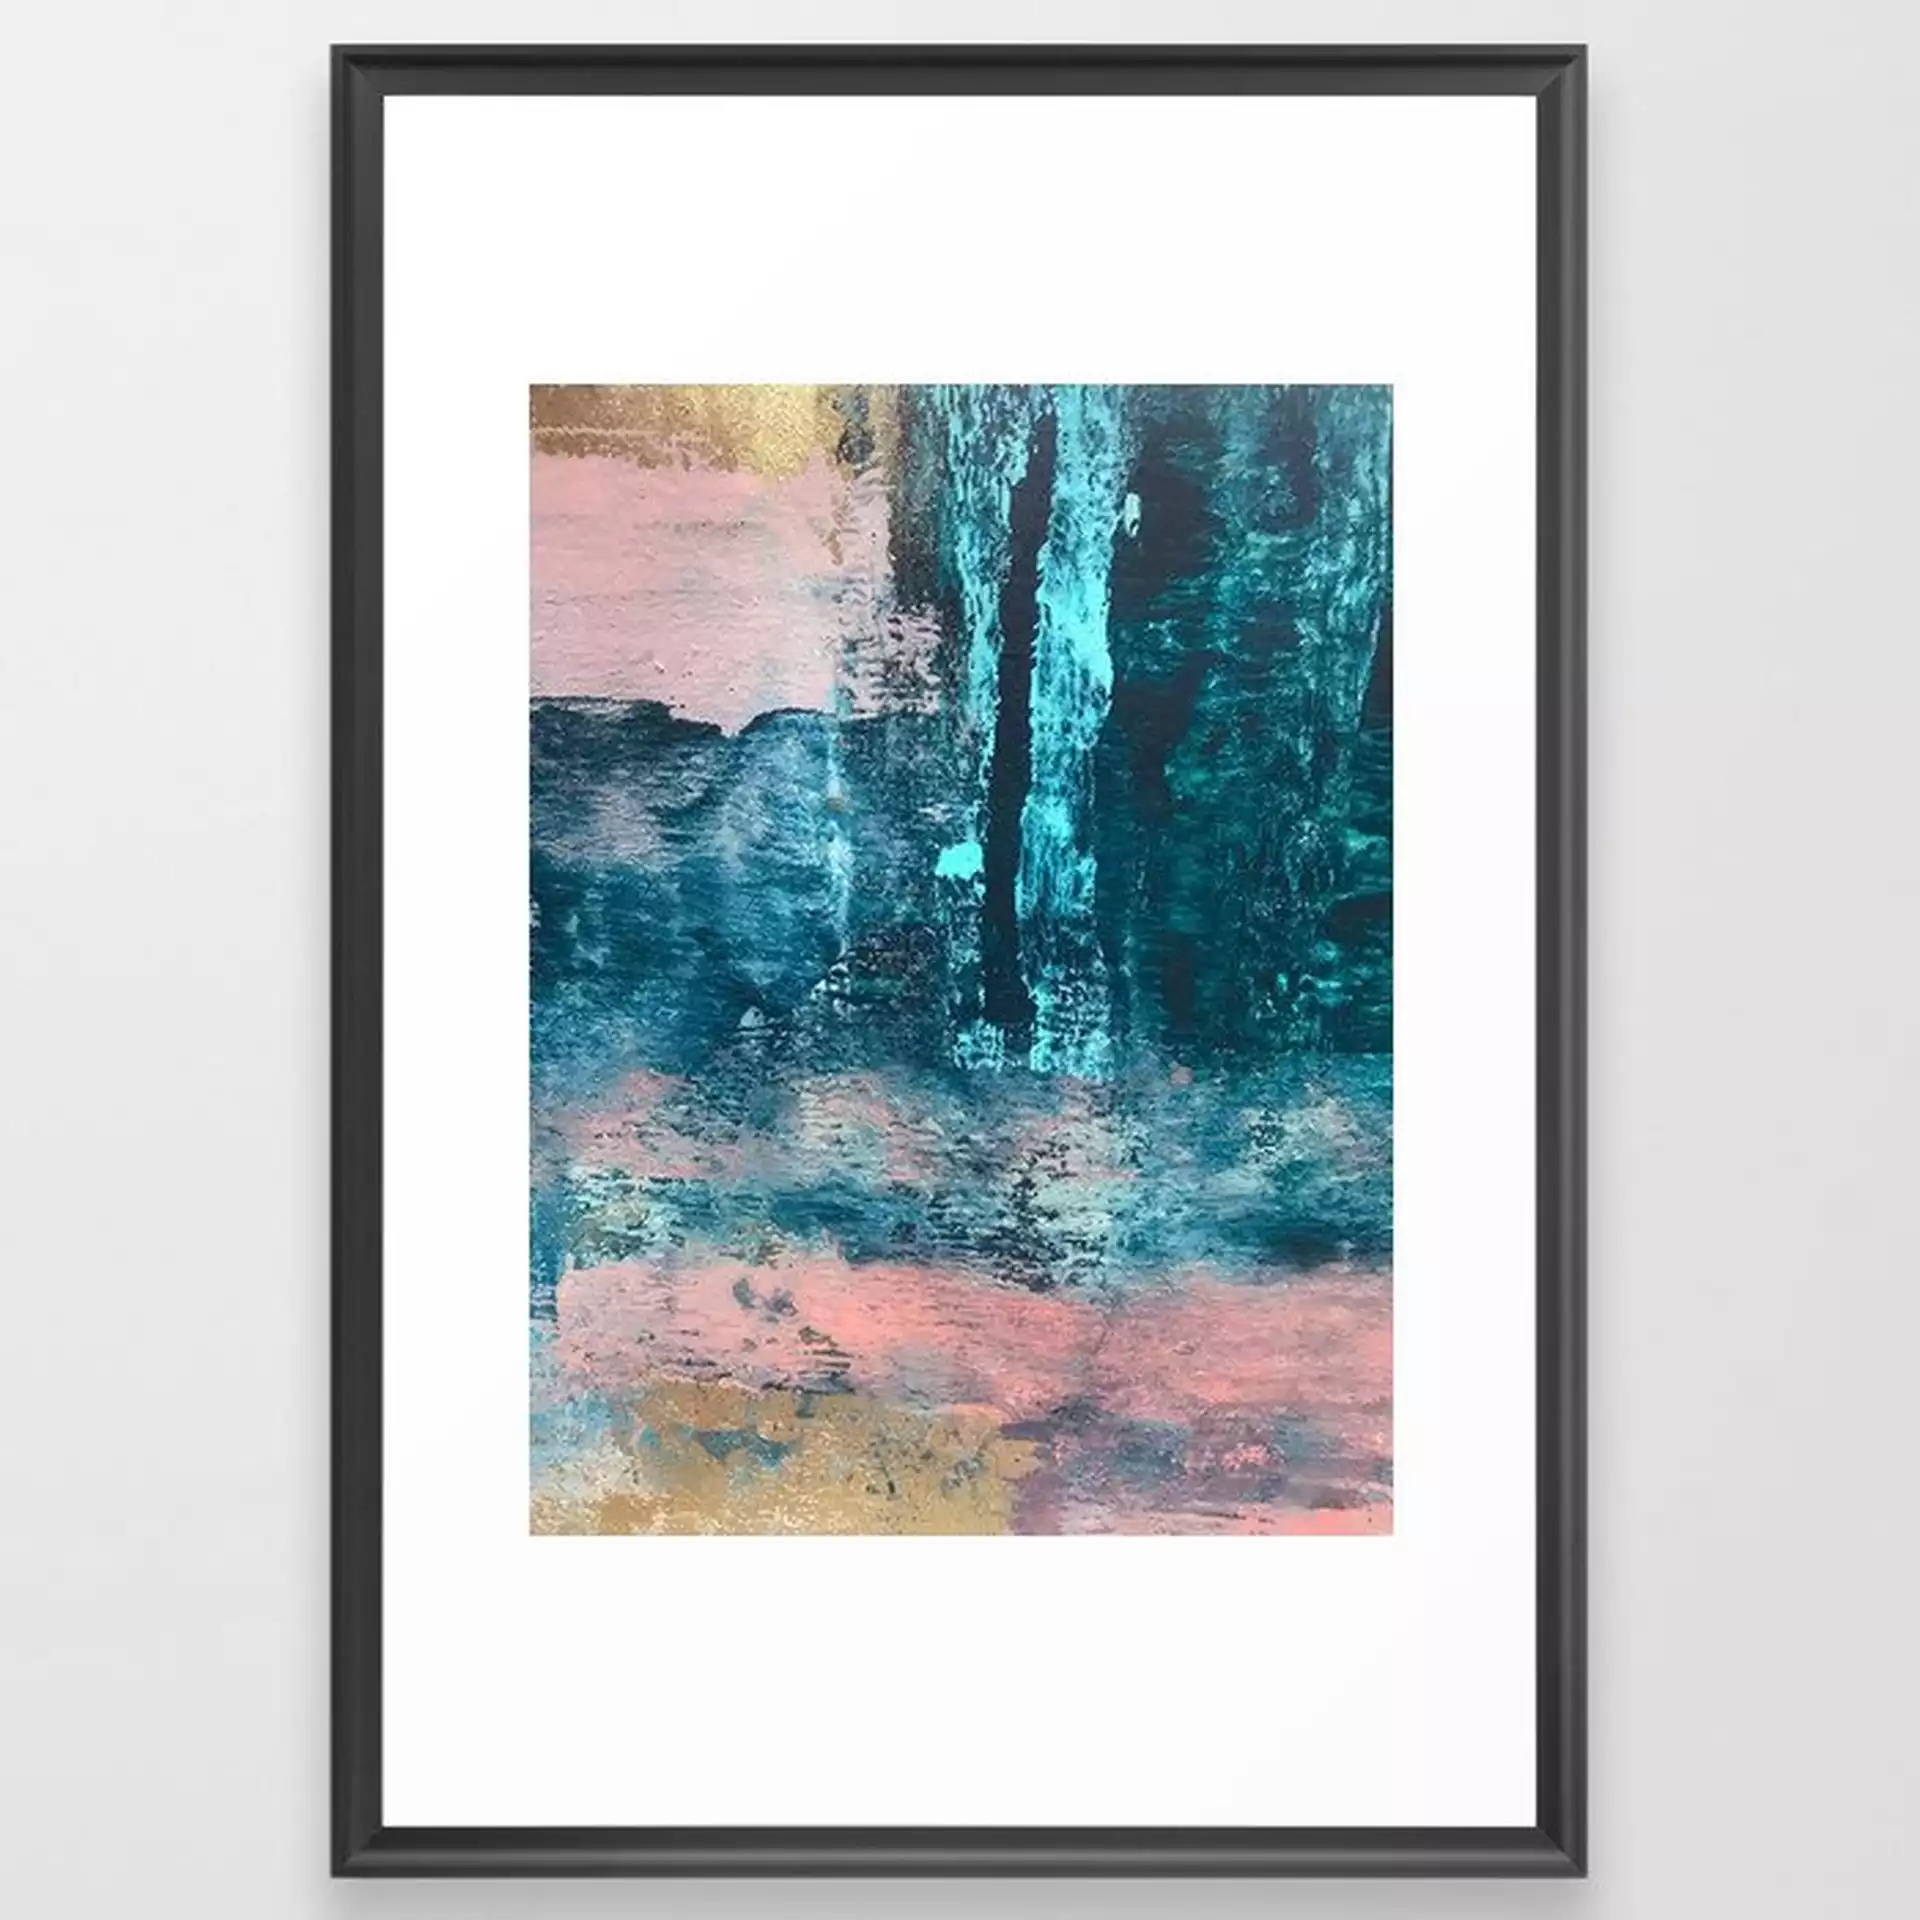 Wishes: An Abstract Mixed-media Piece In Blues, Pink, And Gold Framed Art Print by Alyssa Hamilton Art - Scoop Black - LARGE (Gallery)-26x38